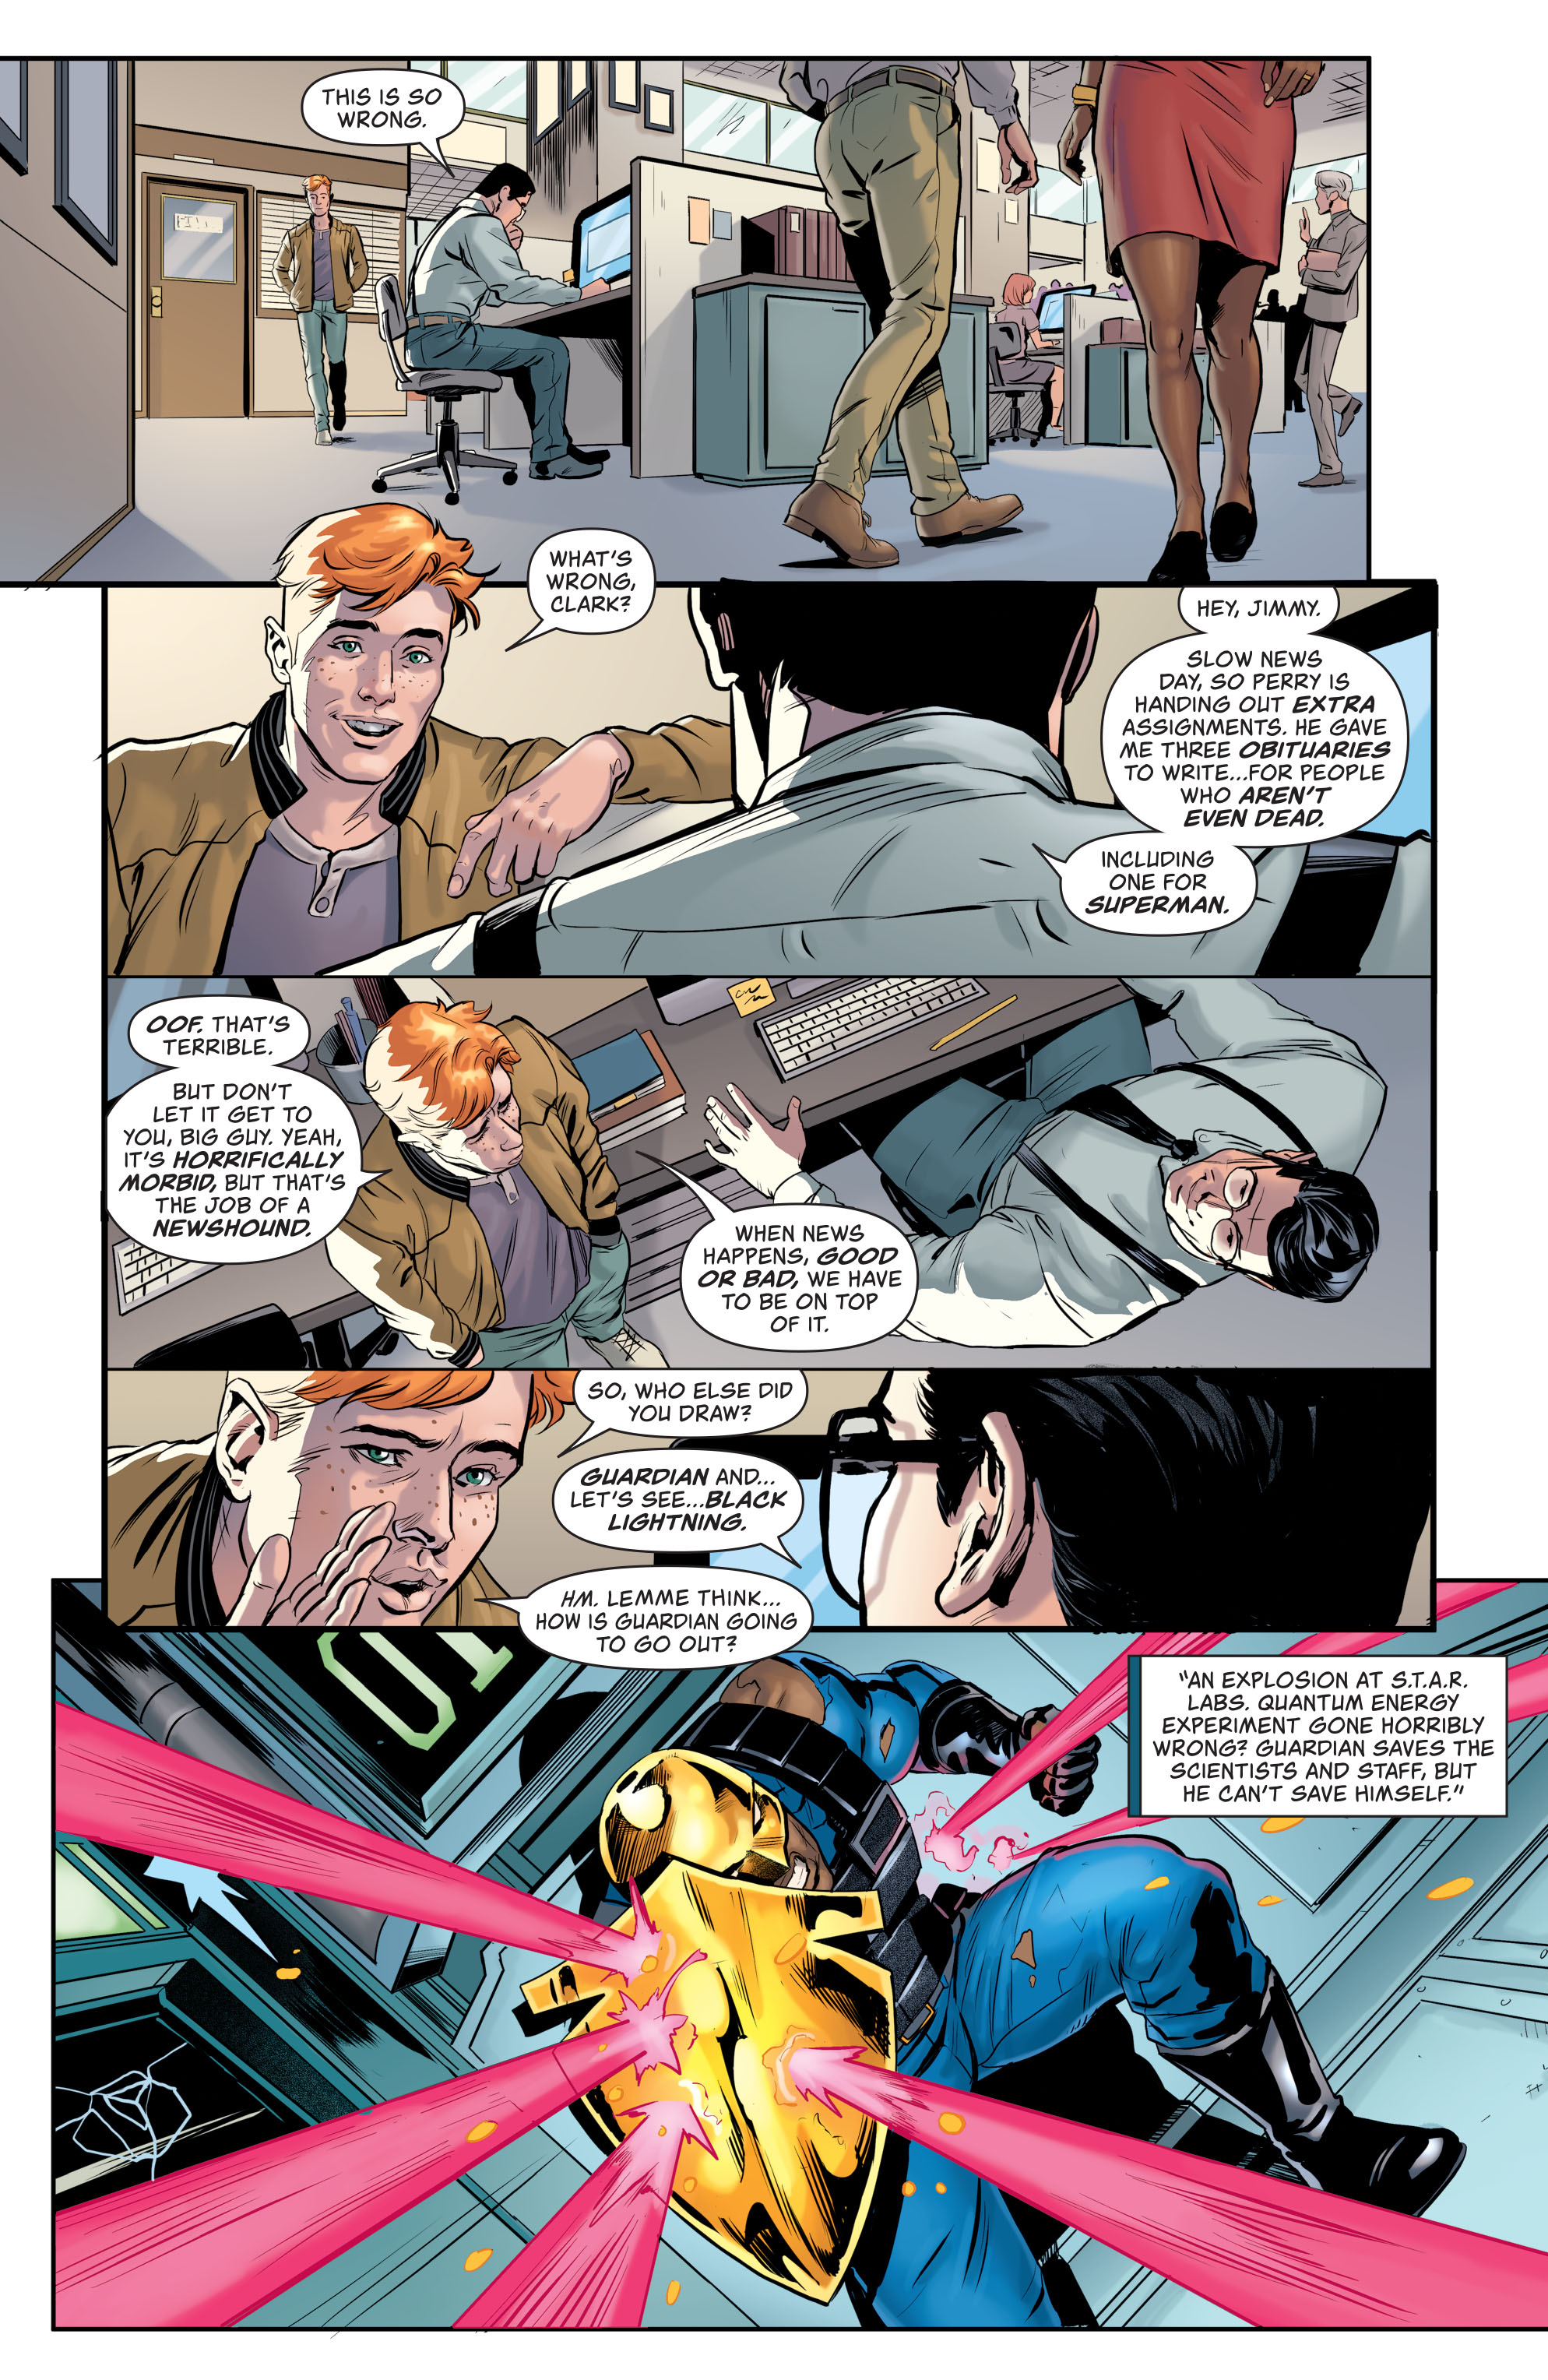 Superman: Man of Tomorrow (2020-): Chapter 8 - Page 3